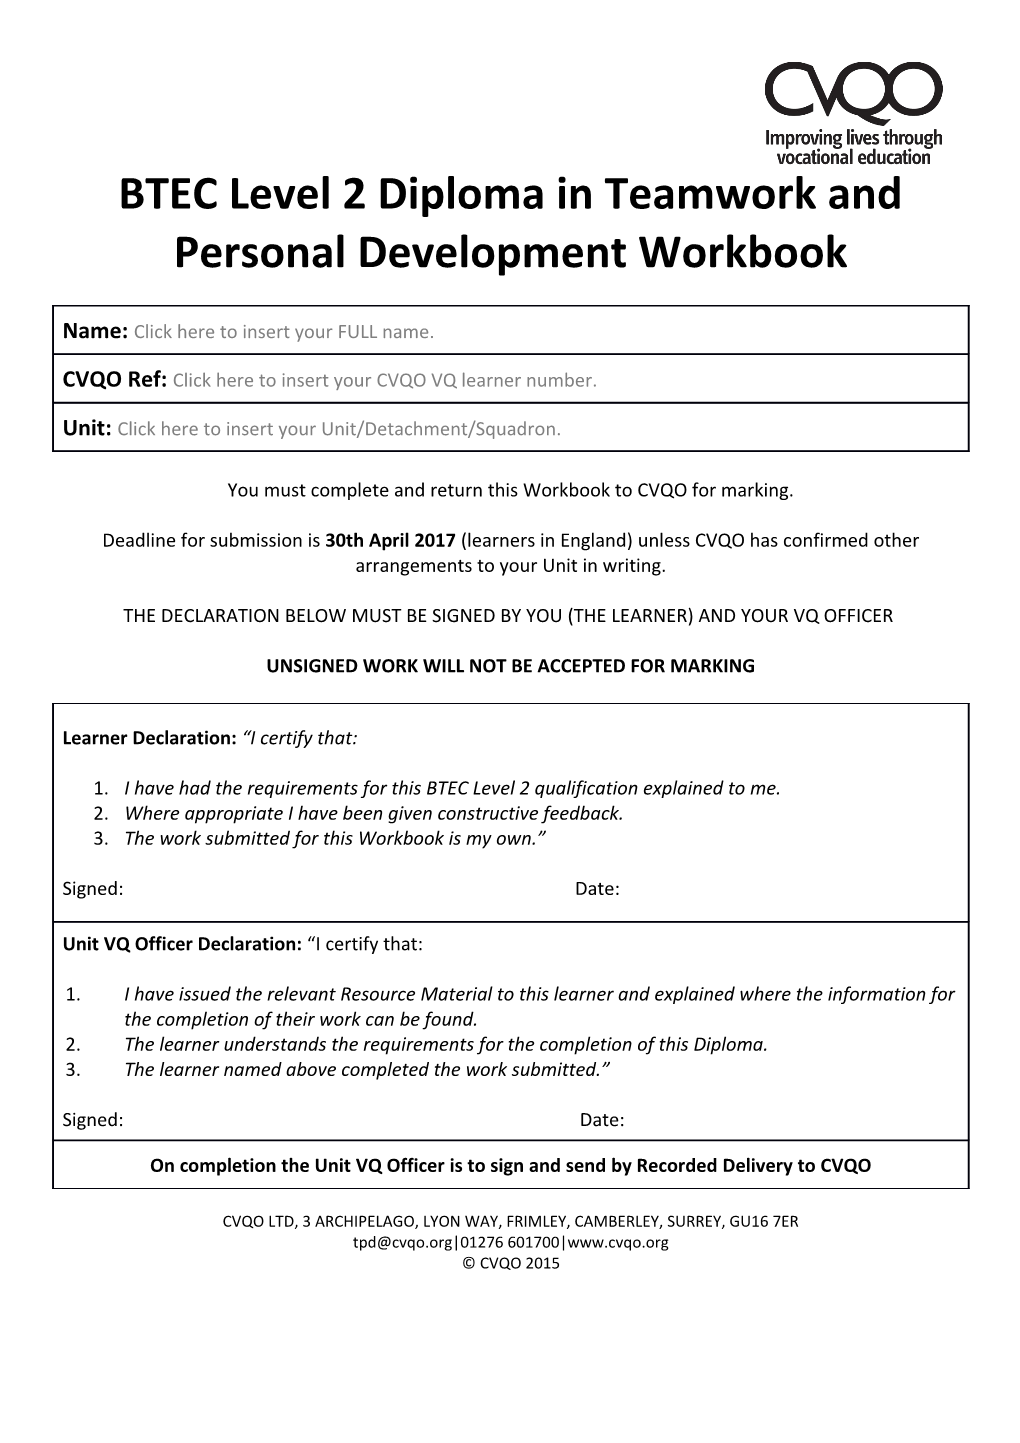 BTEC Level 2 Diploma in Teamwork and Personal Development Workbook